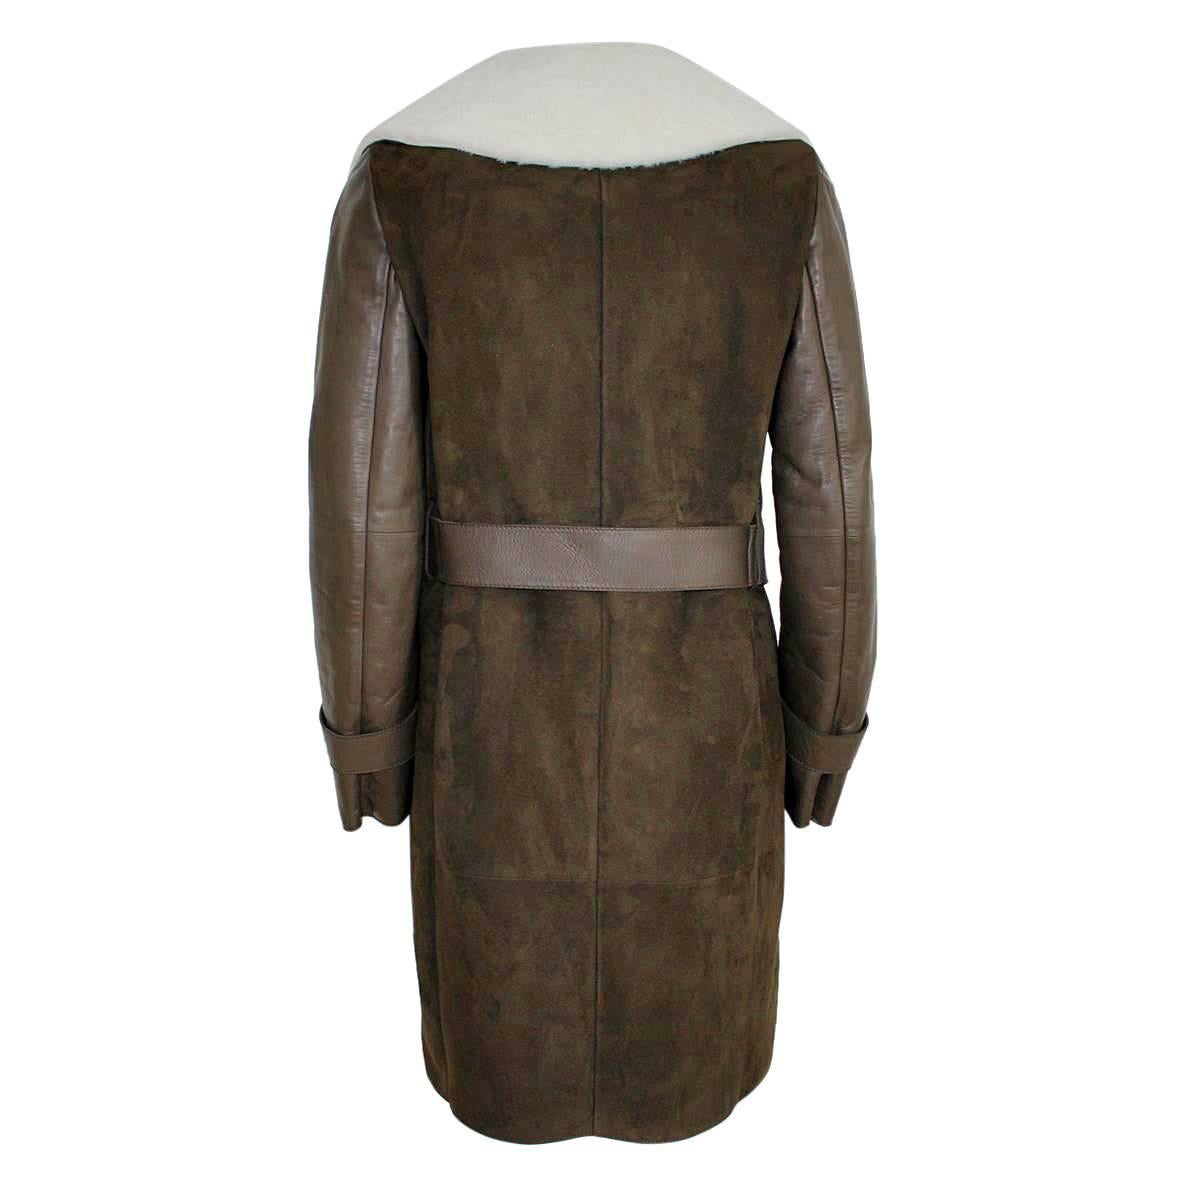 Masterpiece by Liven, Italy
Lamb shearling
Removable white wool collar
Green color
Double breasted
With belt
Total length cm 85 (33.4 inches)
Made in Italy
Worldwide express shipping included in the price !